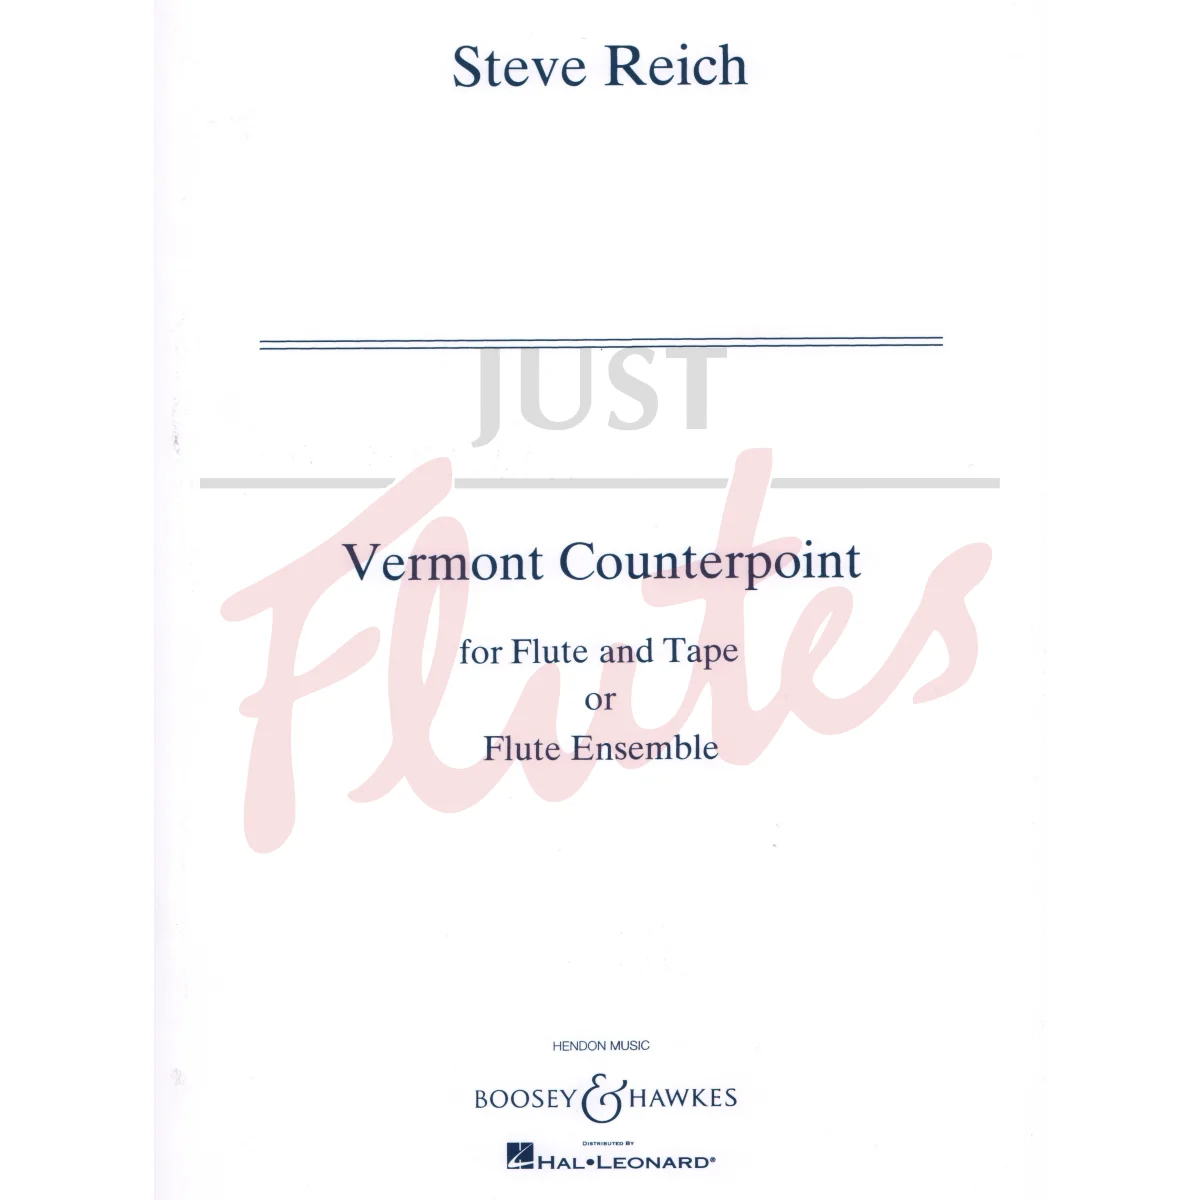 Vermont Counterpoint for Flute and Tape or Flute Ensemble